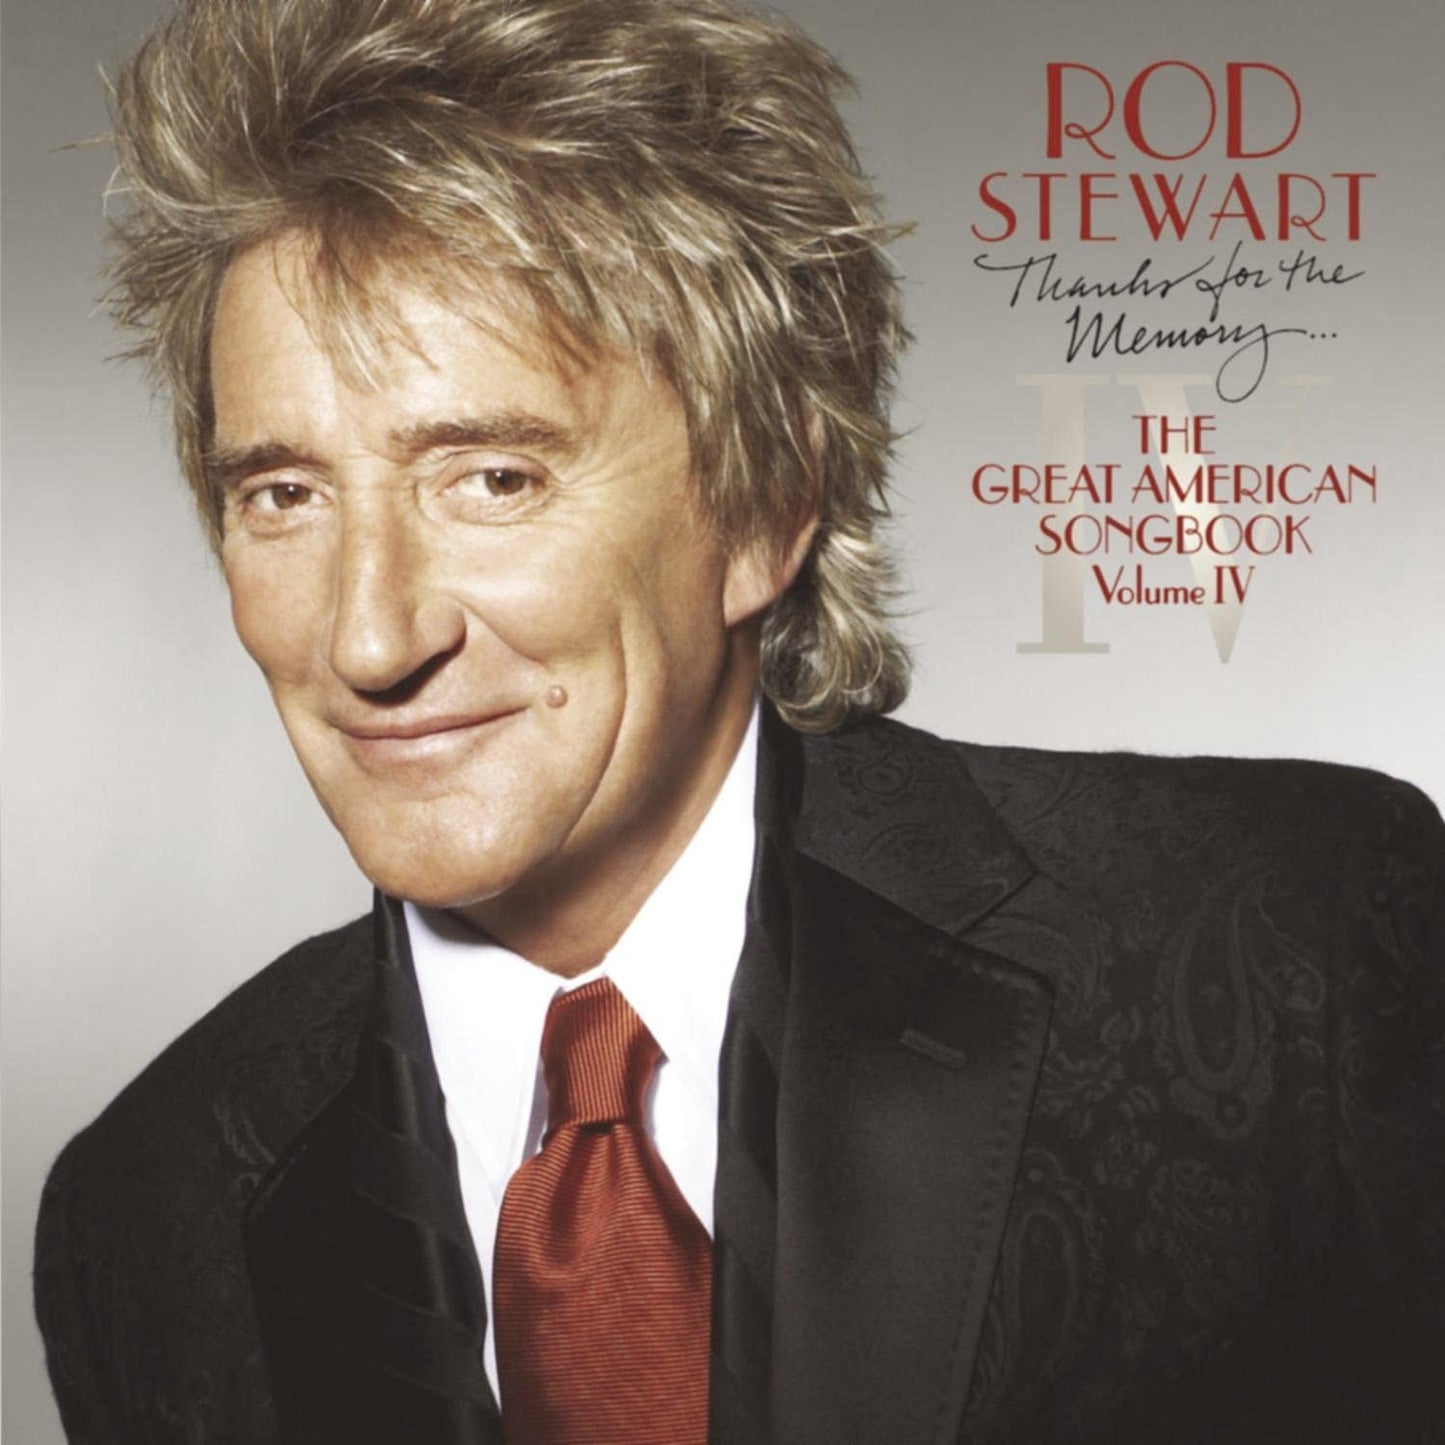 Rod Stewart ‎– Thanks For The Memory... The Great American Songbook Volume IV - USED CD